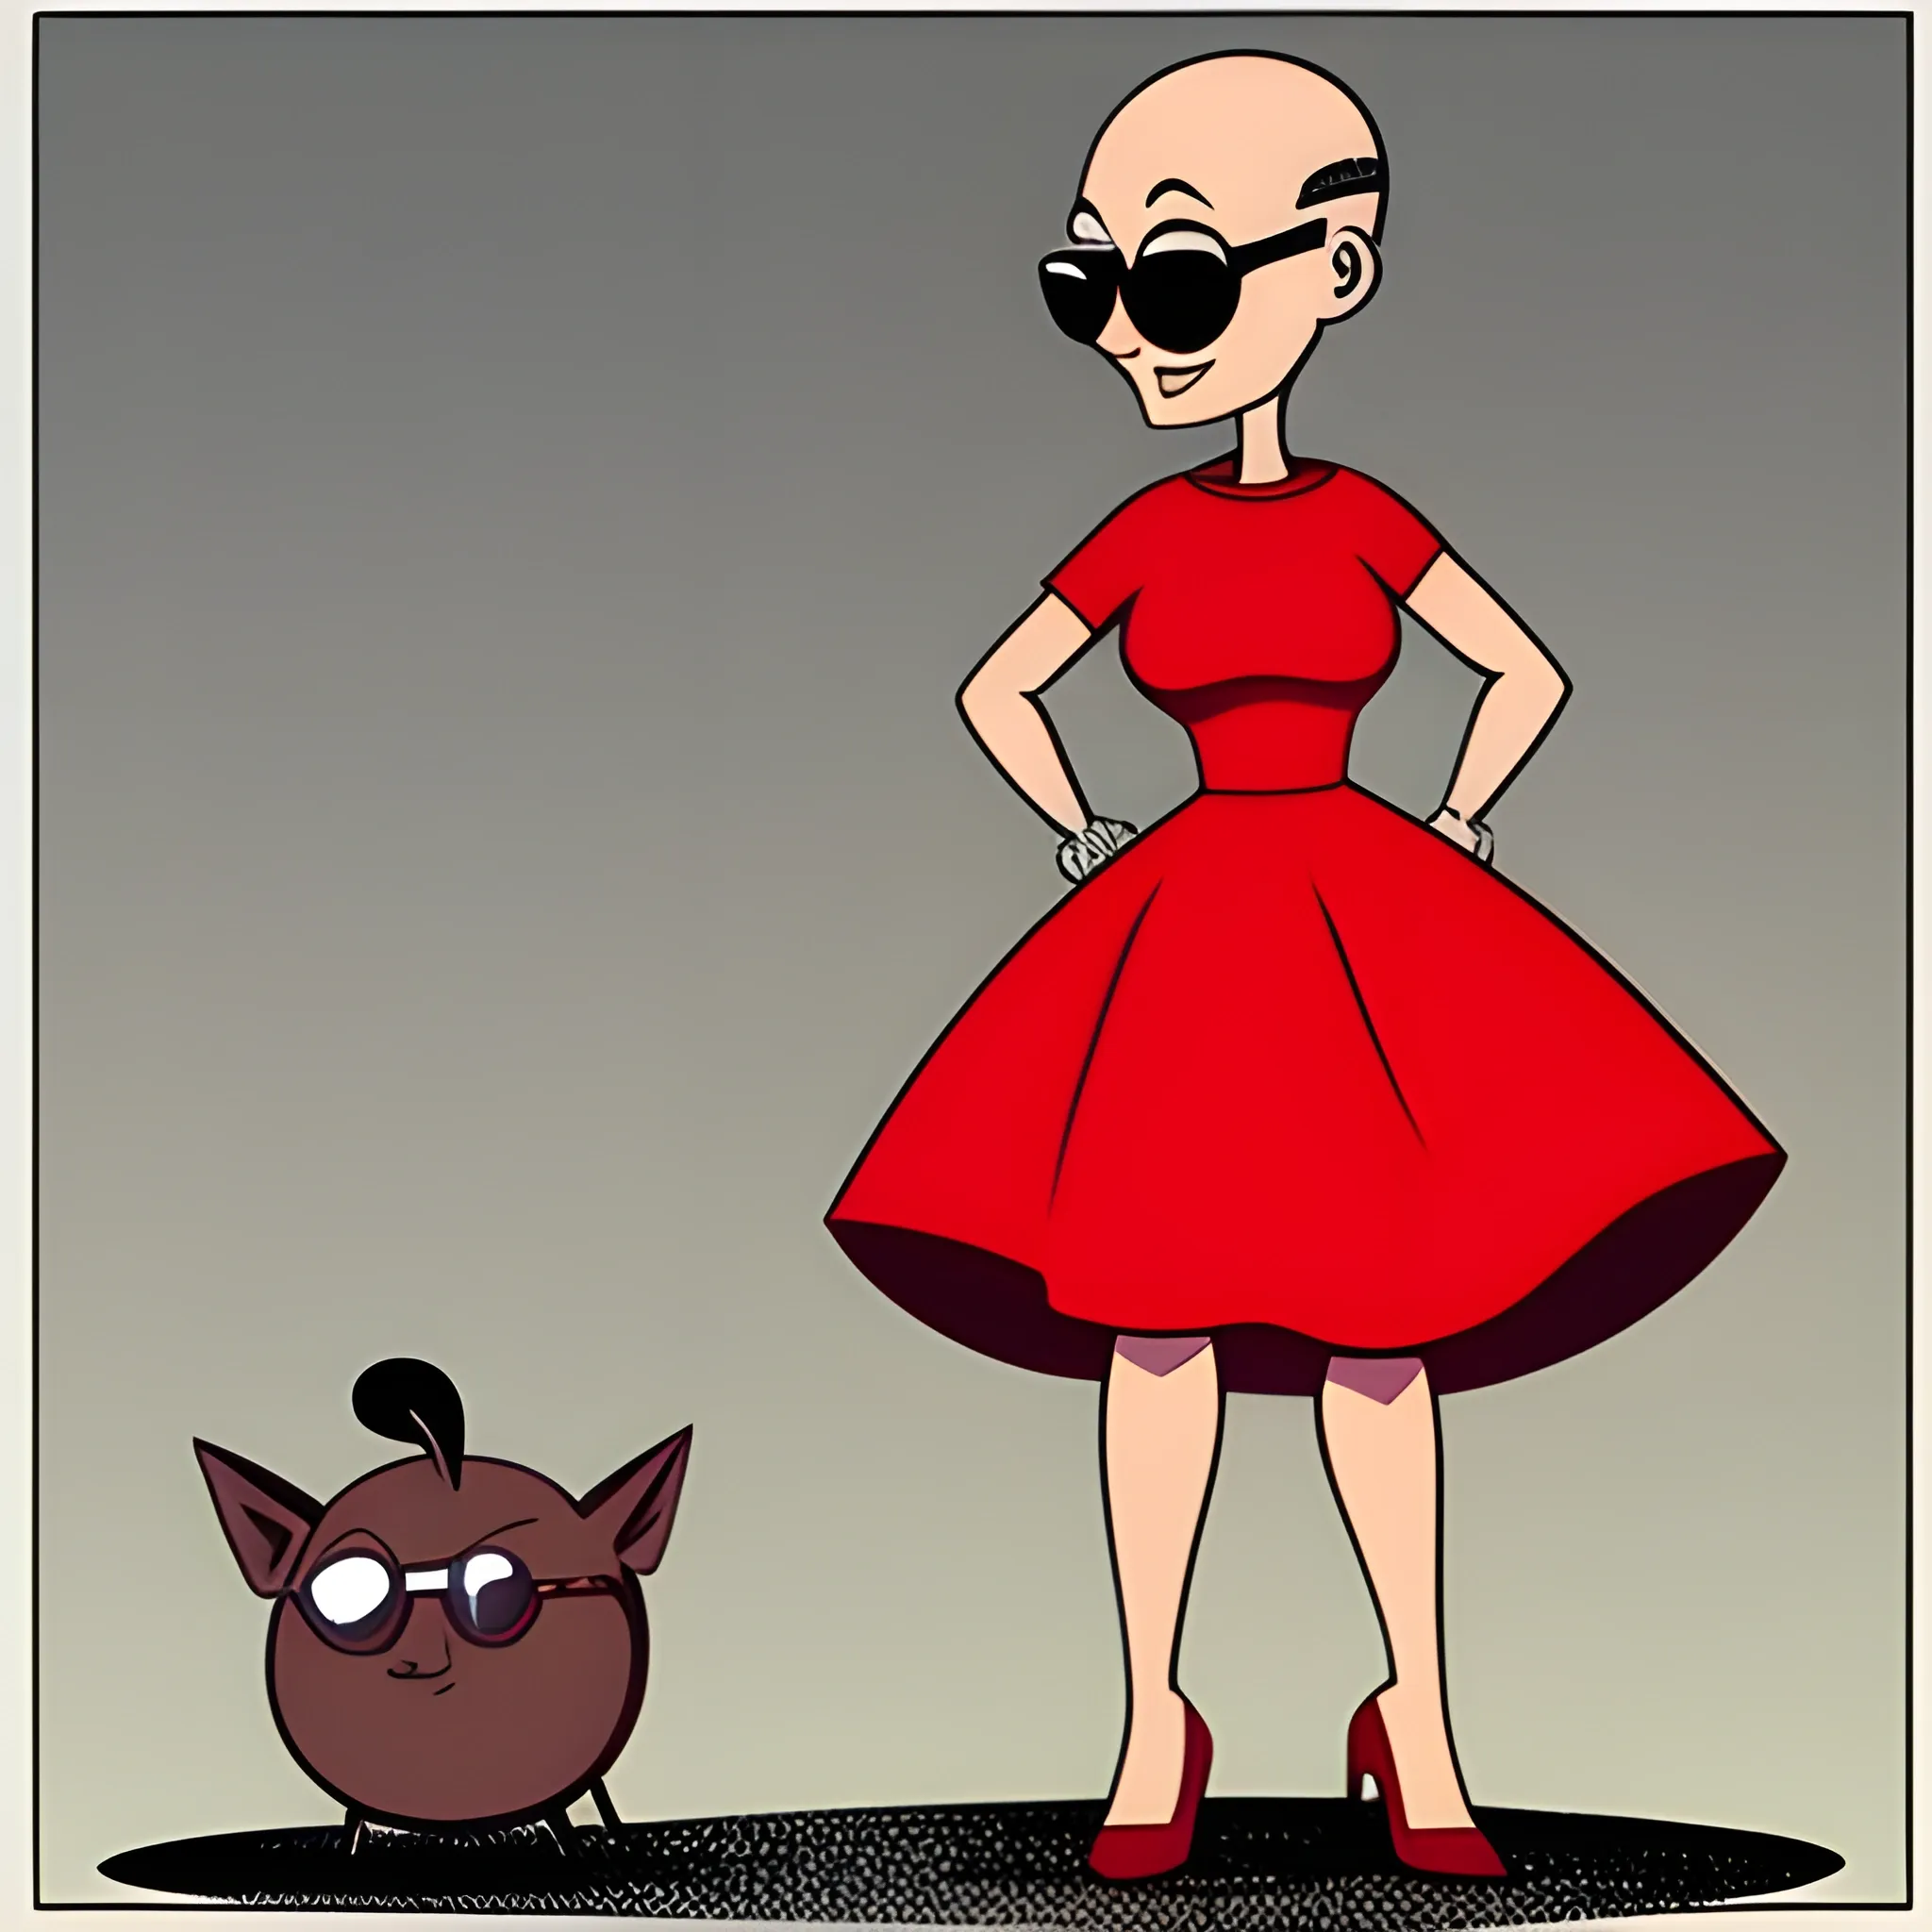 , Cartoon bald guy with sunglasses in a womens red dress mad